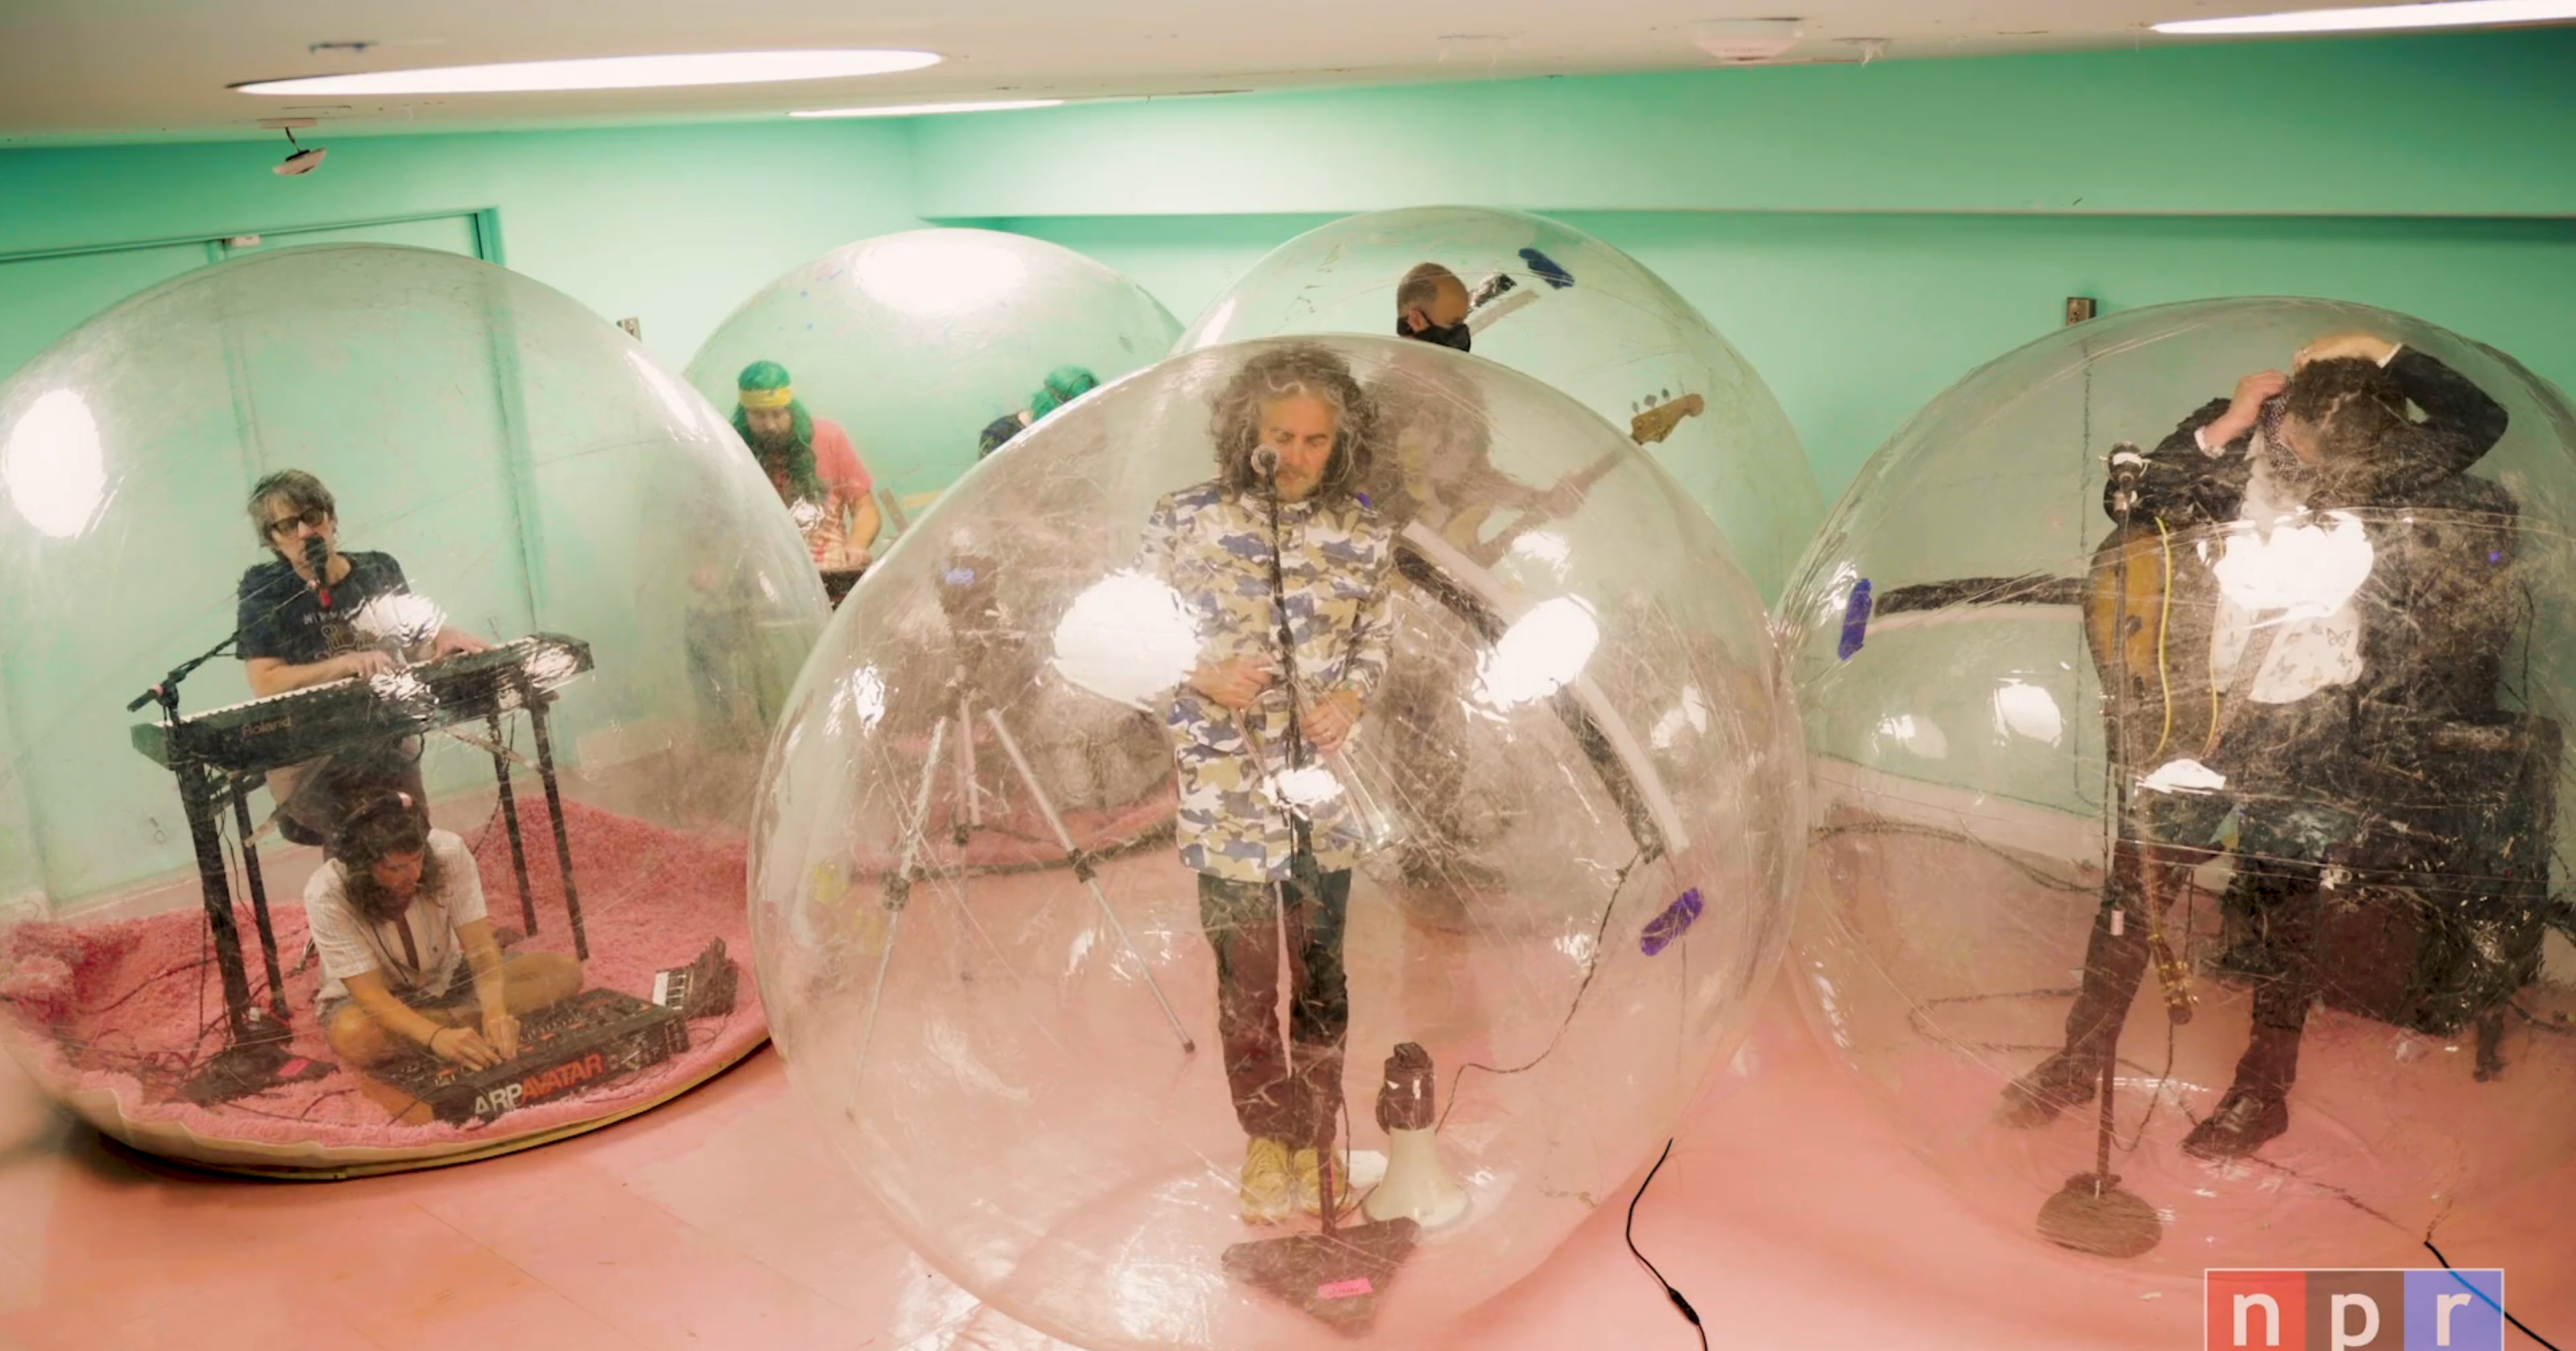 Flaming Lips Return to First Club They Ever Played for <i>Kimmel</i> Performance